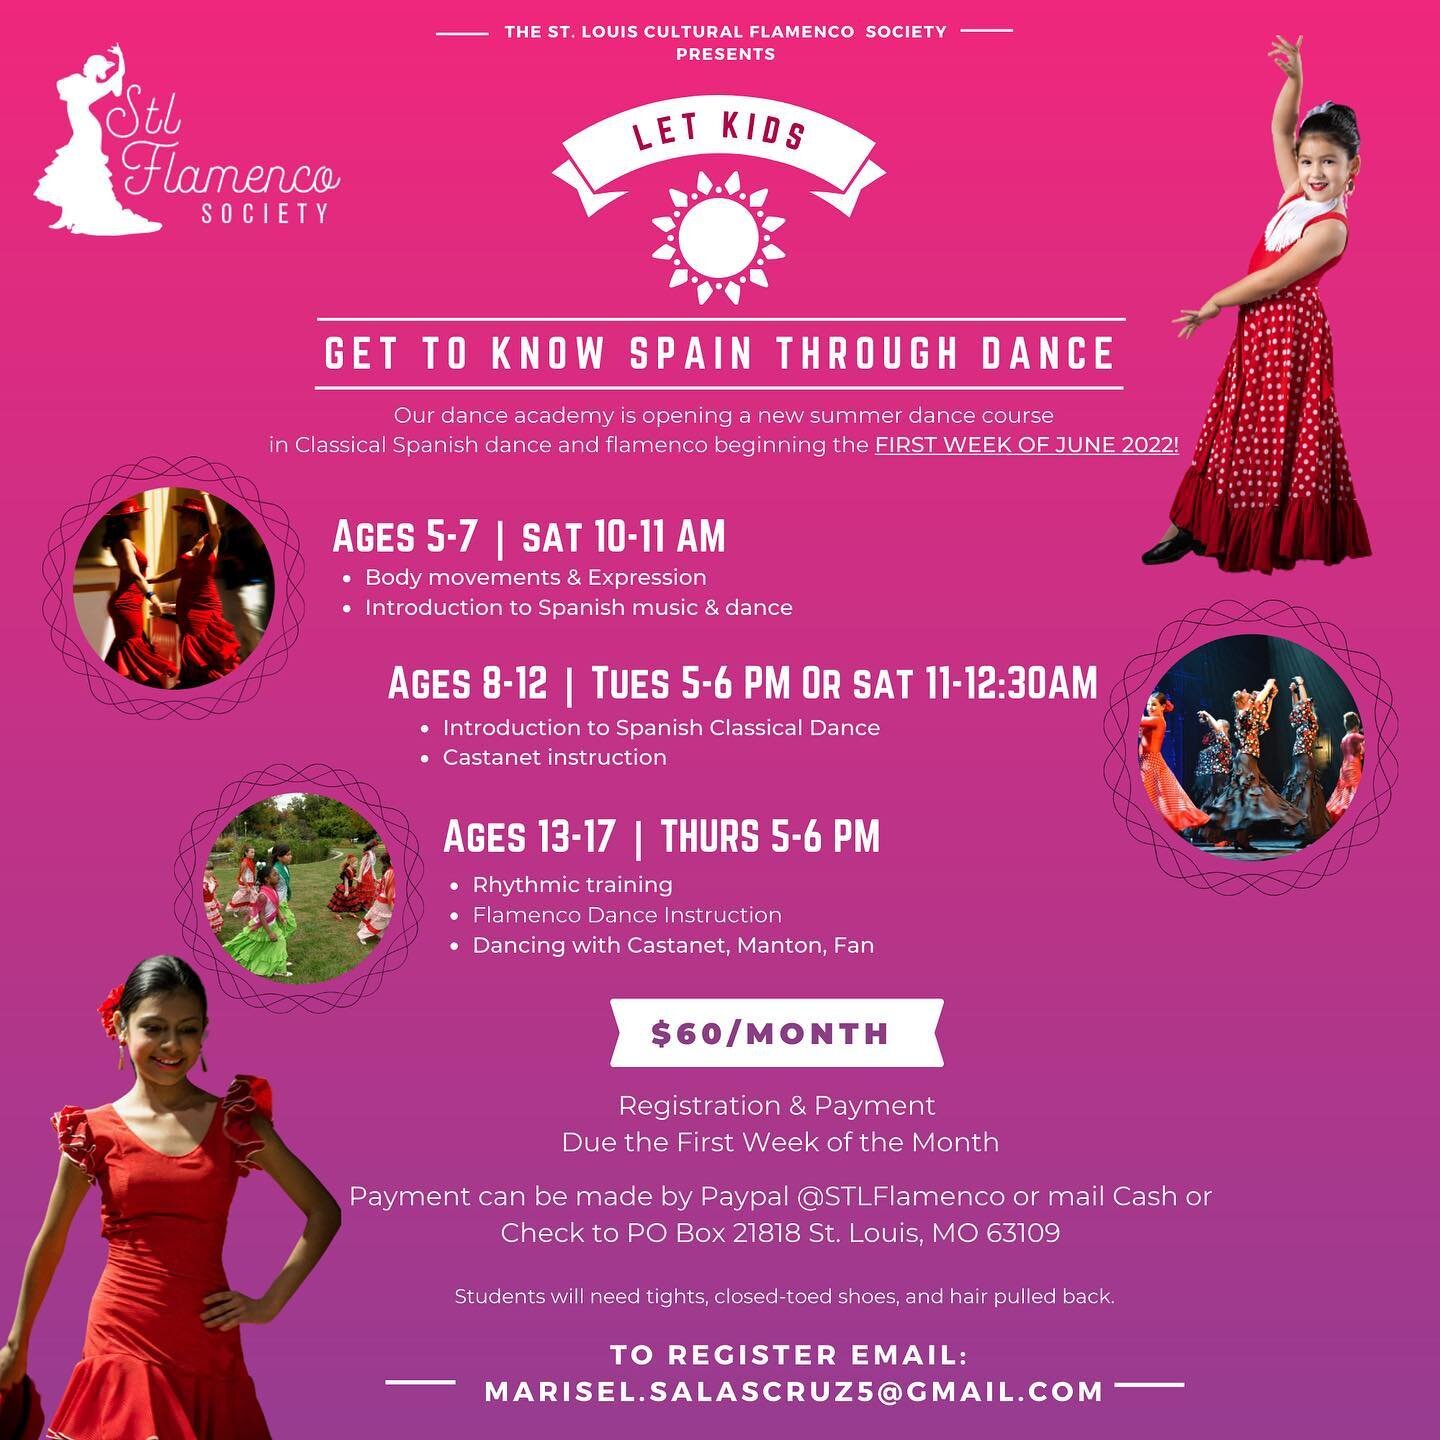 ☀️Now your kids have the opportunity to learn flamenco during our summer course beginning the first week of June! Various technique and instruction will be provided on different days of the week. 💃 

Levels for all ages are available. Payment is due